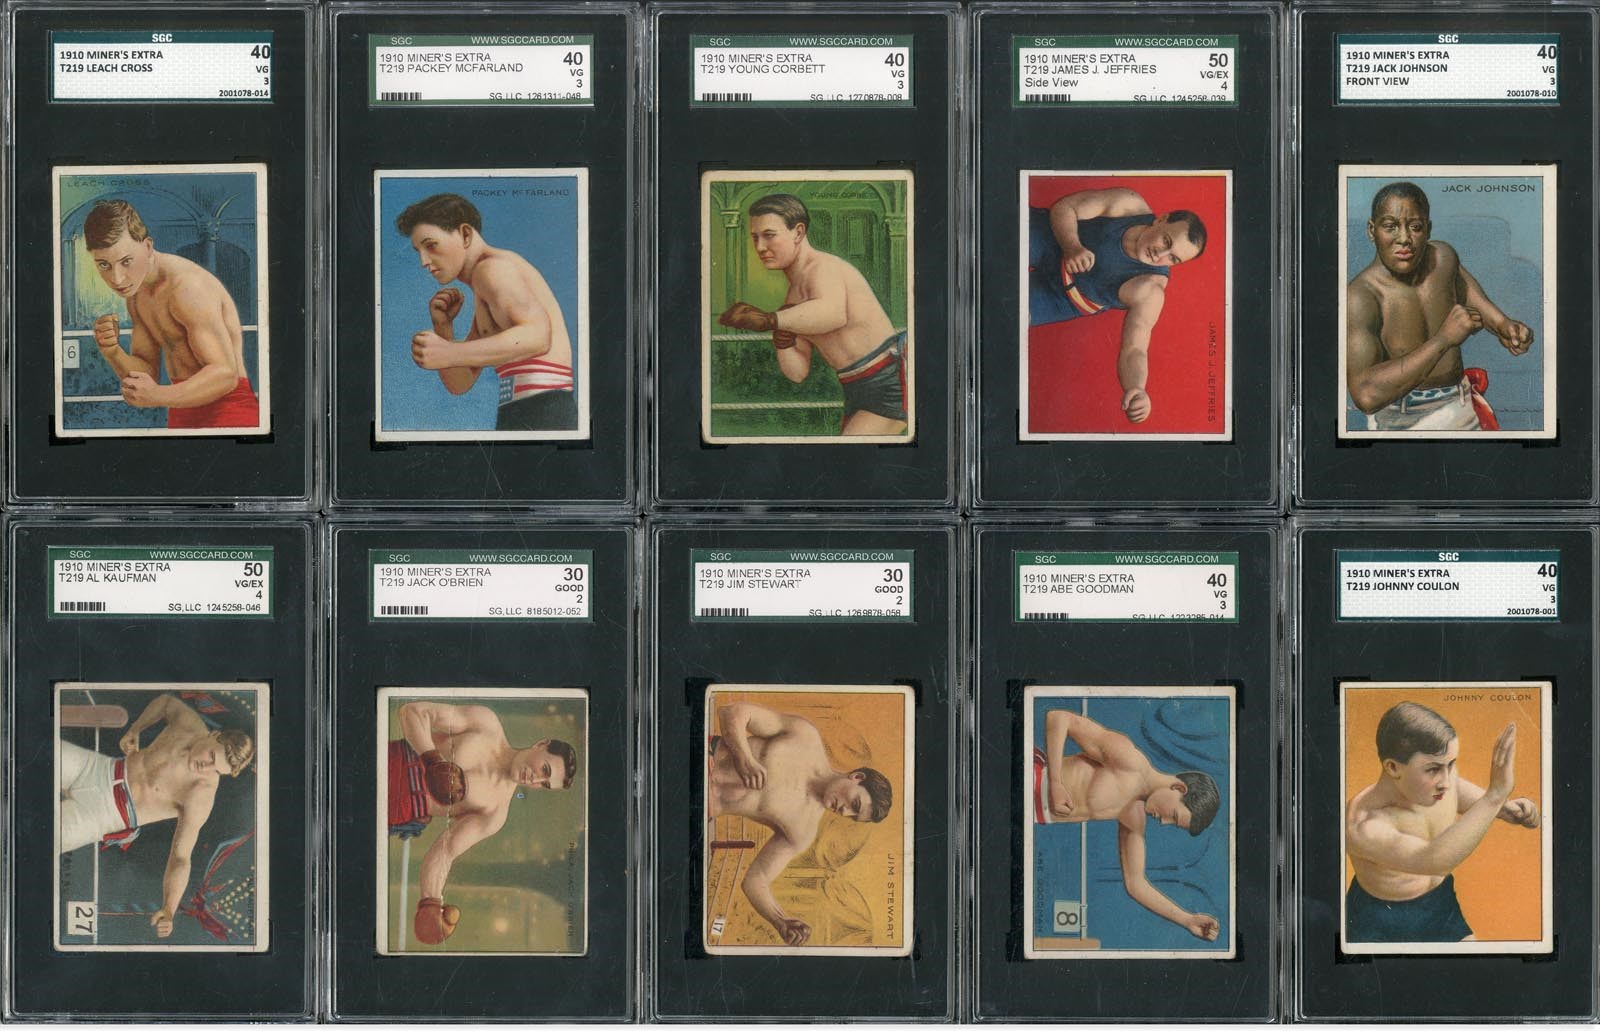 Rare 1910 Miner's Extra T219 Boxing Card Complete Set - #1 on SGC Registry